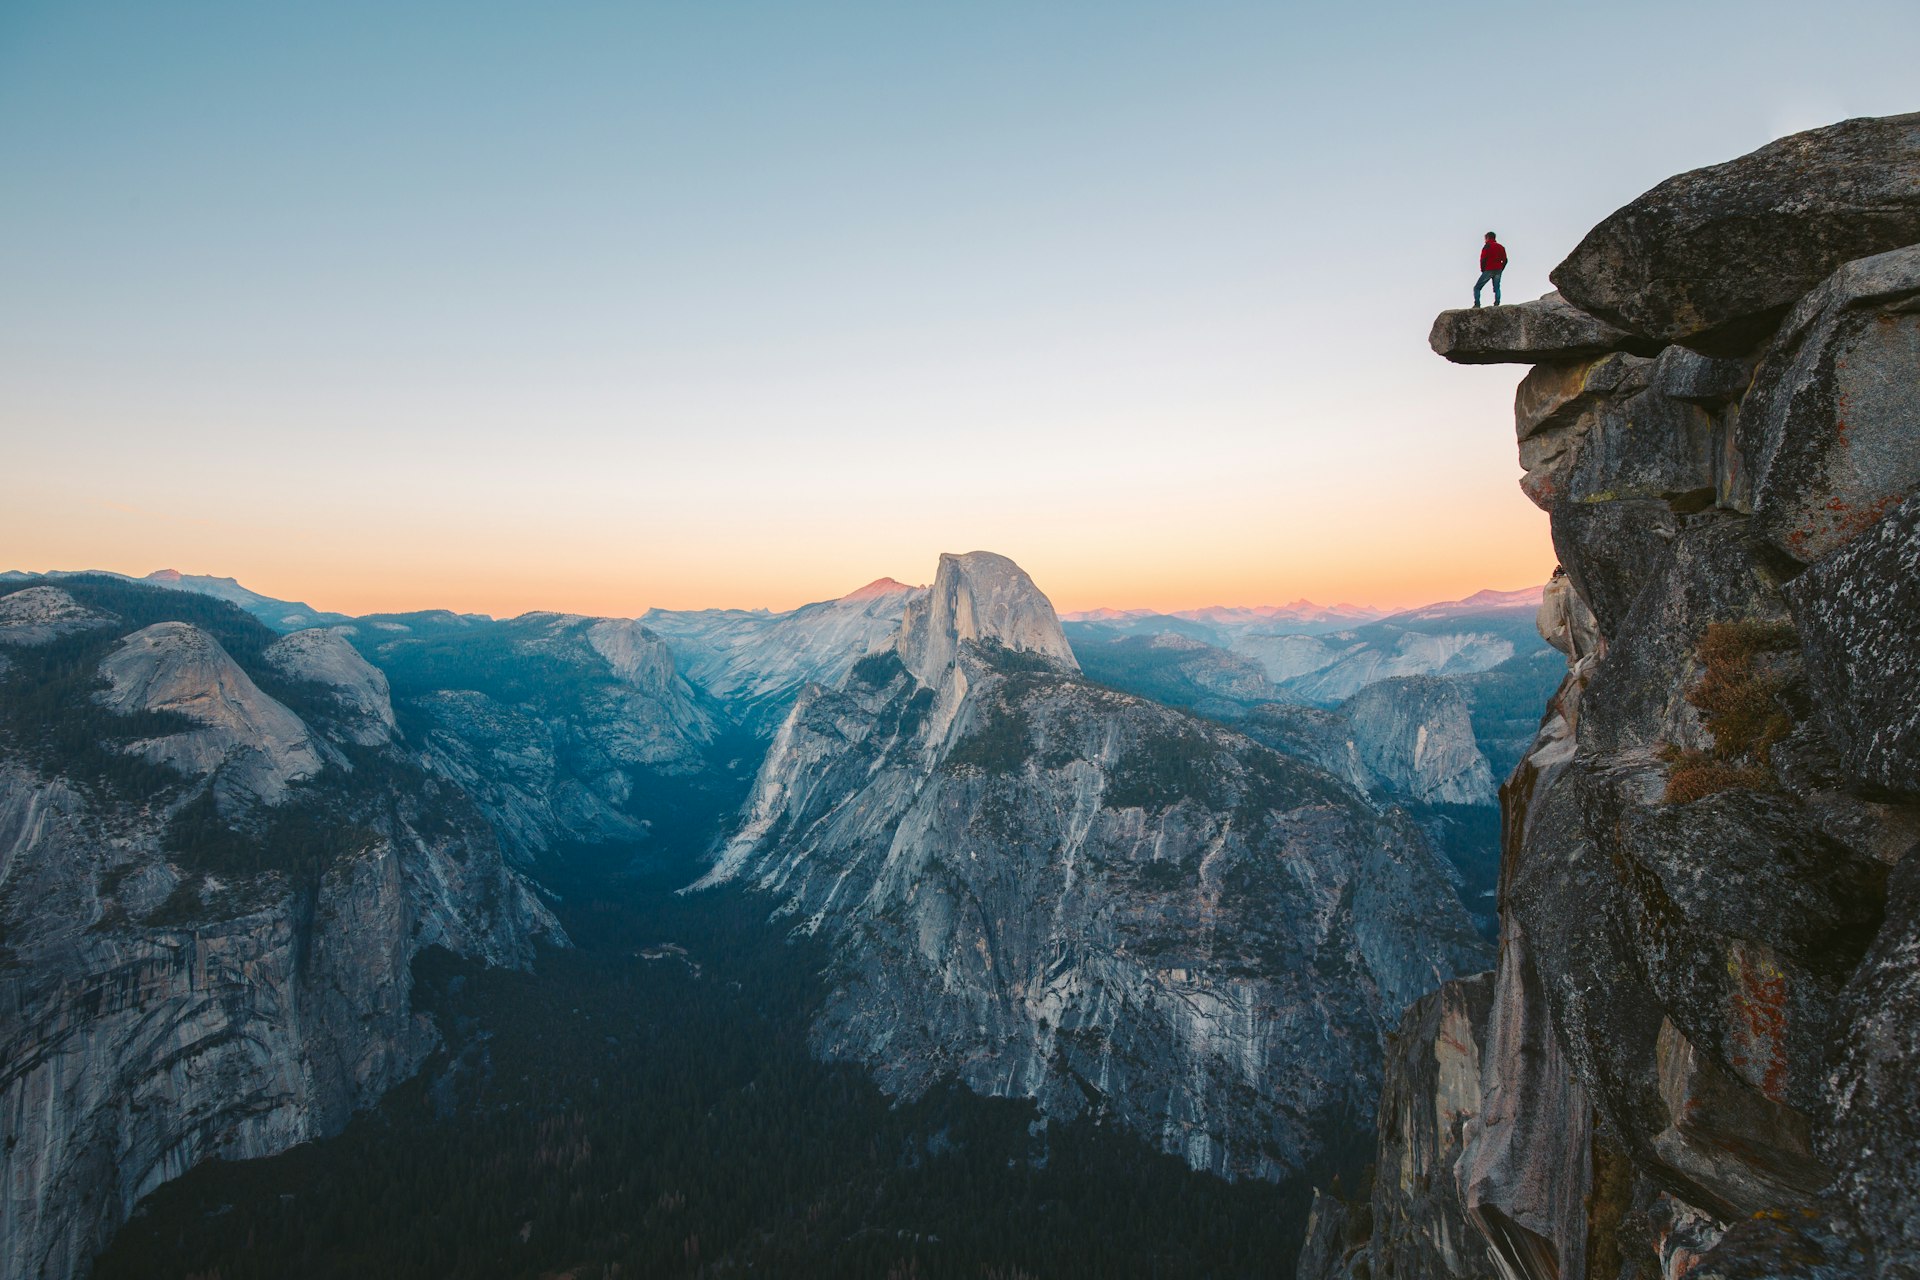 Hiker standing on an overhanging rock and taking in the view at Glacier Point overlook during the evening.